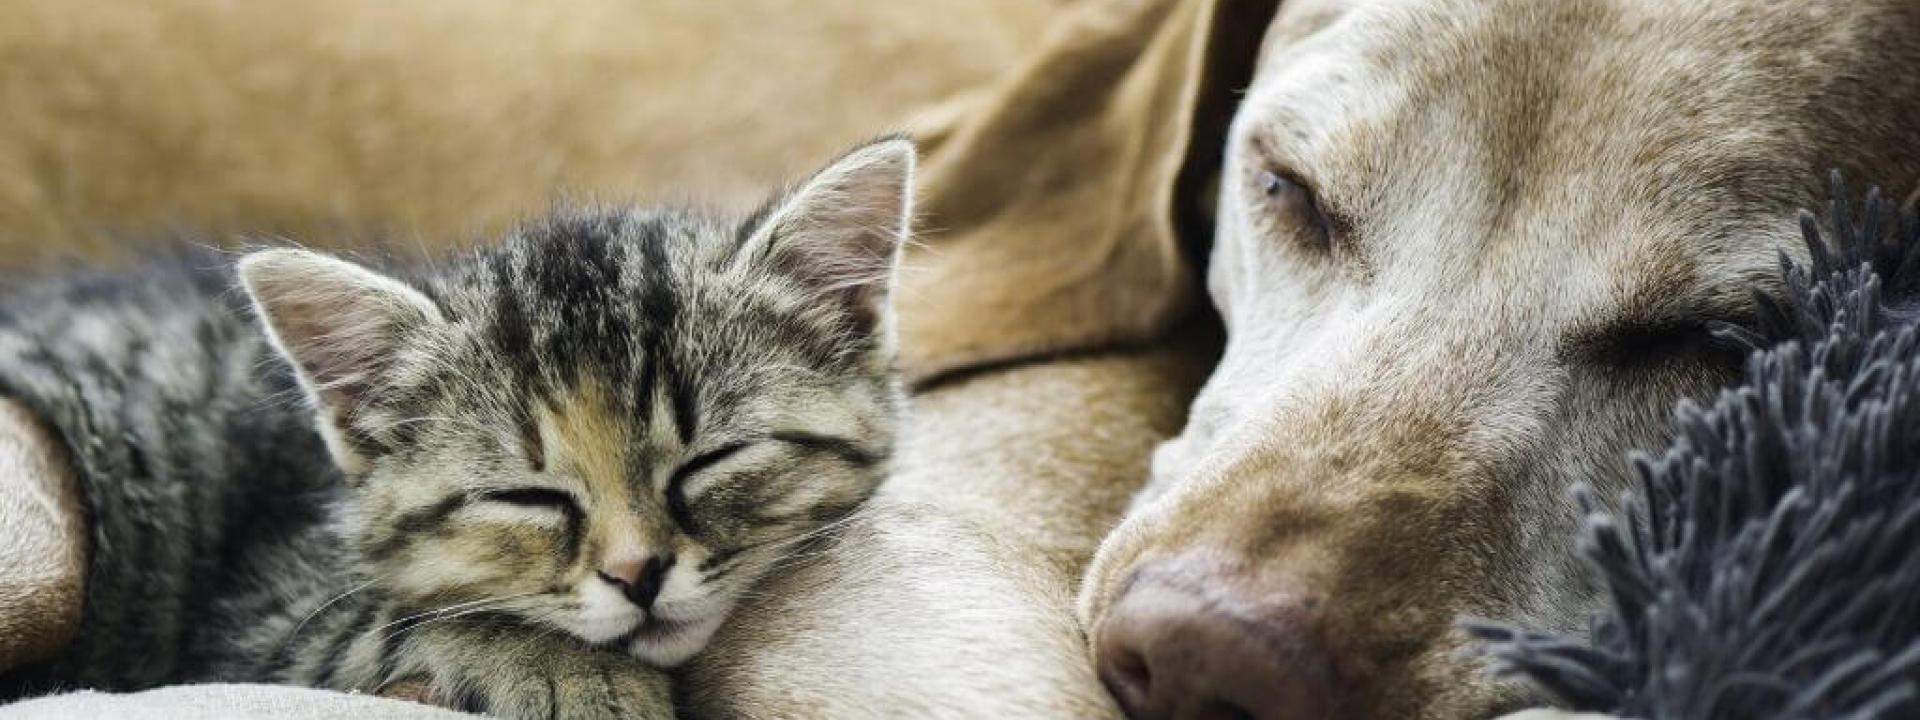 dogs and cats euthanasia